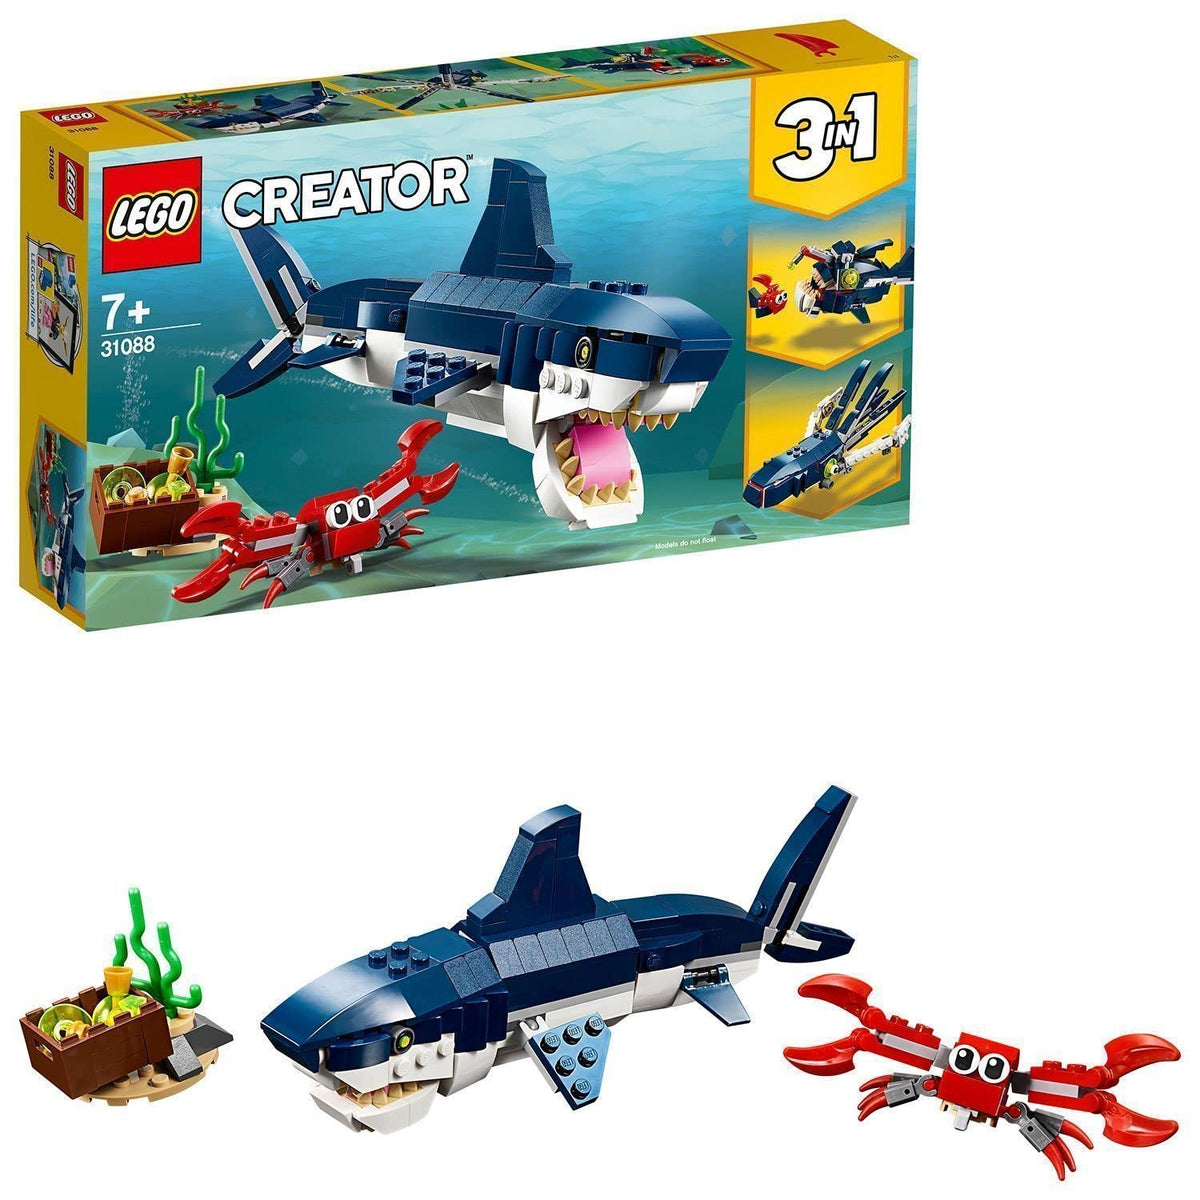 LEGO Creator 3in1 Deep Sea Creatures Building Kit For Ages 7+